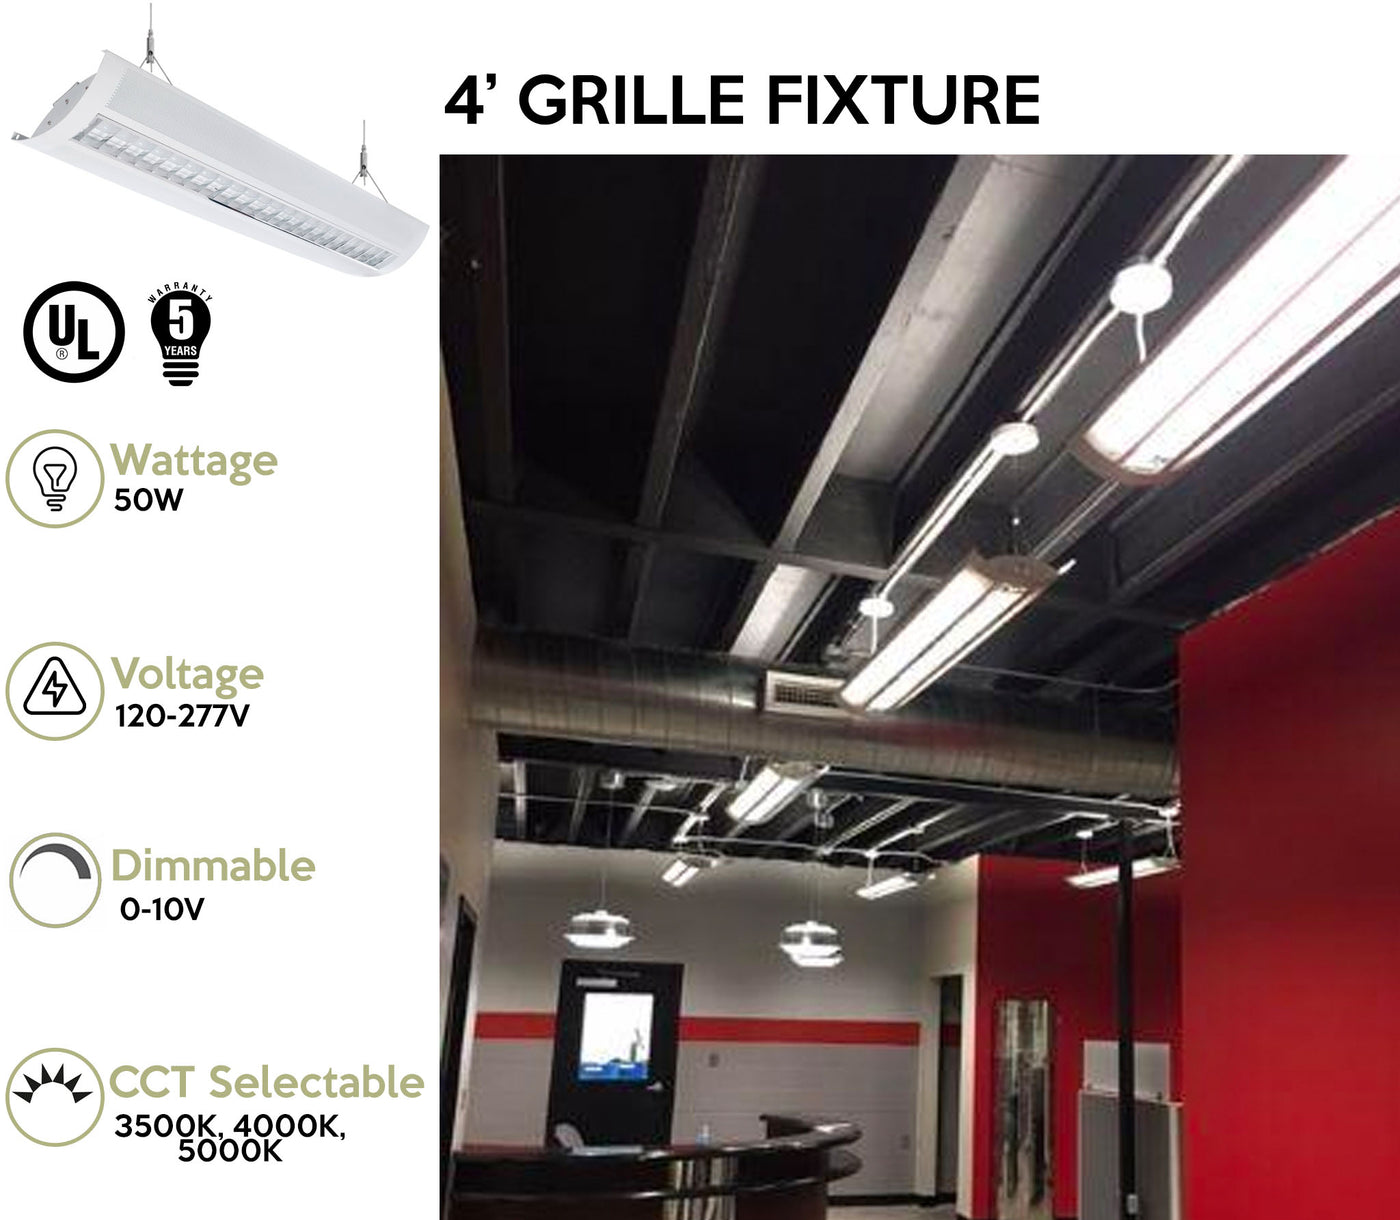 4 Foot LED Direct/Indirect Grille Fixture With Metal Shade, 50W, 120-277V, CCT Selectable 3500K / 4000K / 5000K